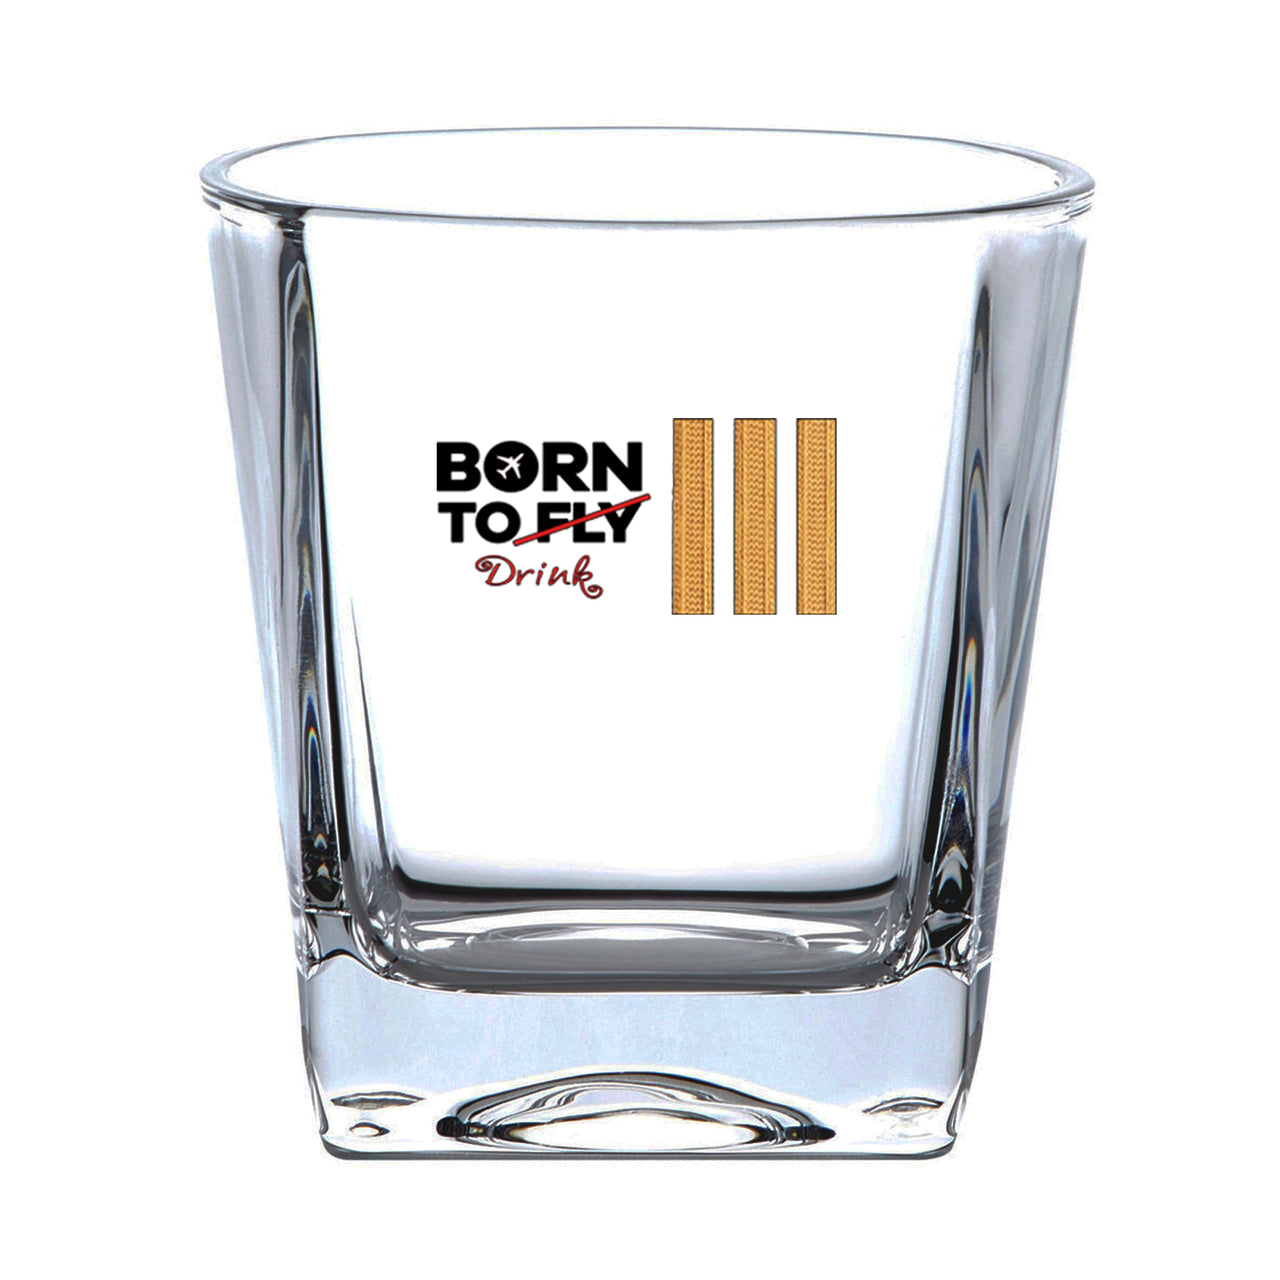 Born To Drink & 3 Lines Designed Whiskey Glass